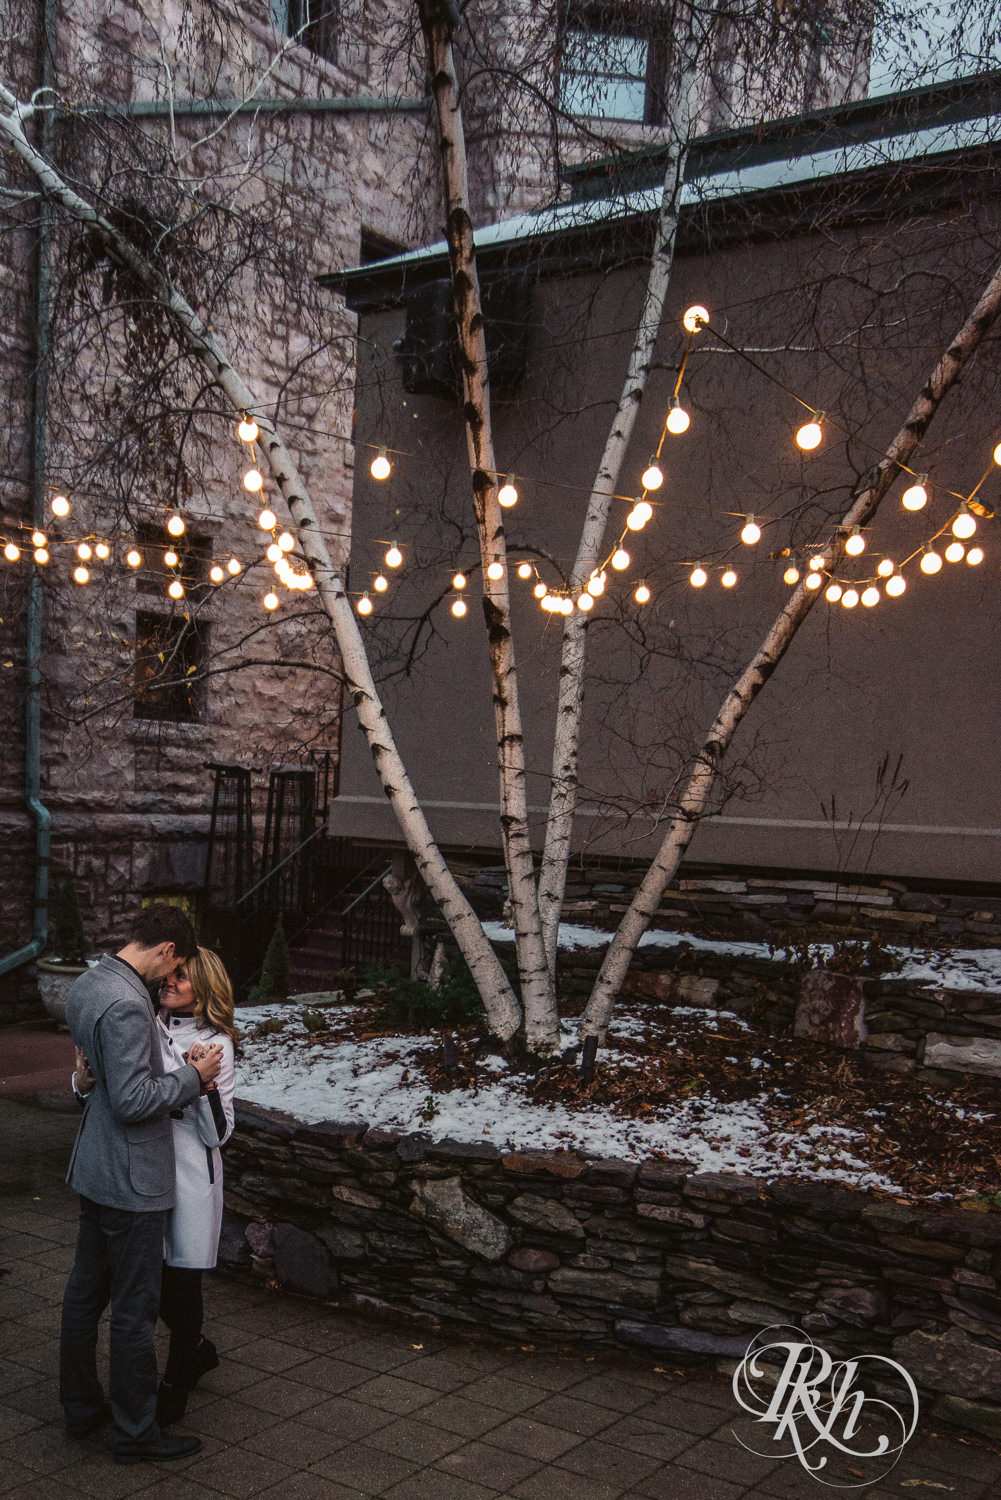 Man and woman in winter coats dance in front of the Van Dusen Mansion in Minneapolis, Minnesota.